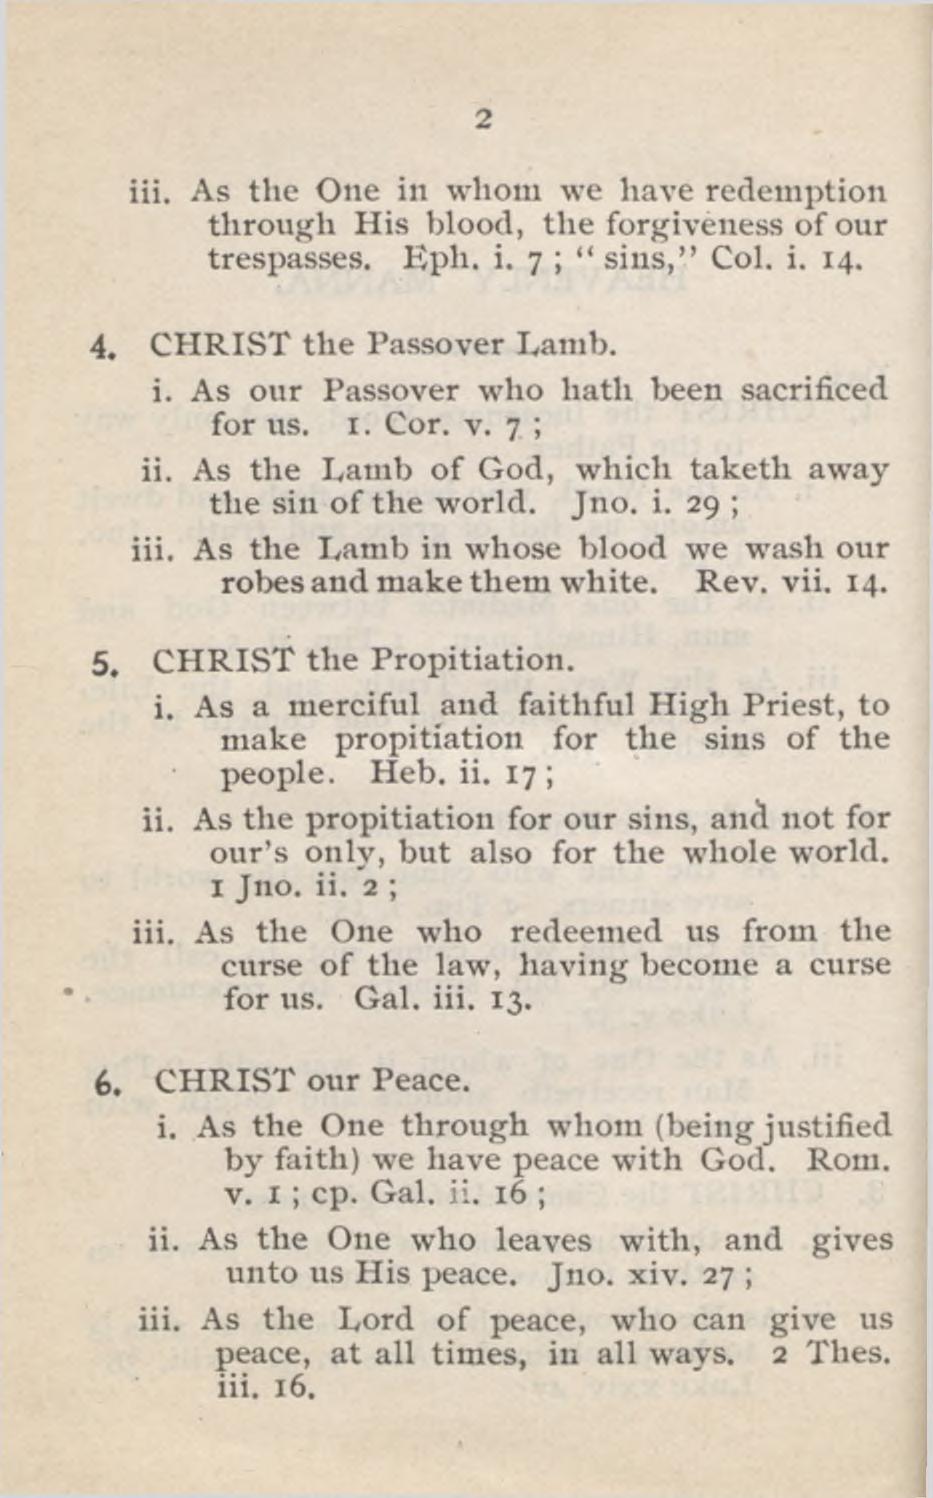 2 iii. As the One in whom we have redemption through His blood, the forgiveness o f our trespasses. Eph. i. 7 ; sins, Col. i. 14. 4. C H R IST the Passover Lamb. i. As our Passover who hath been sacrificed for us.